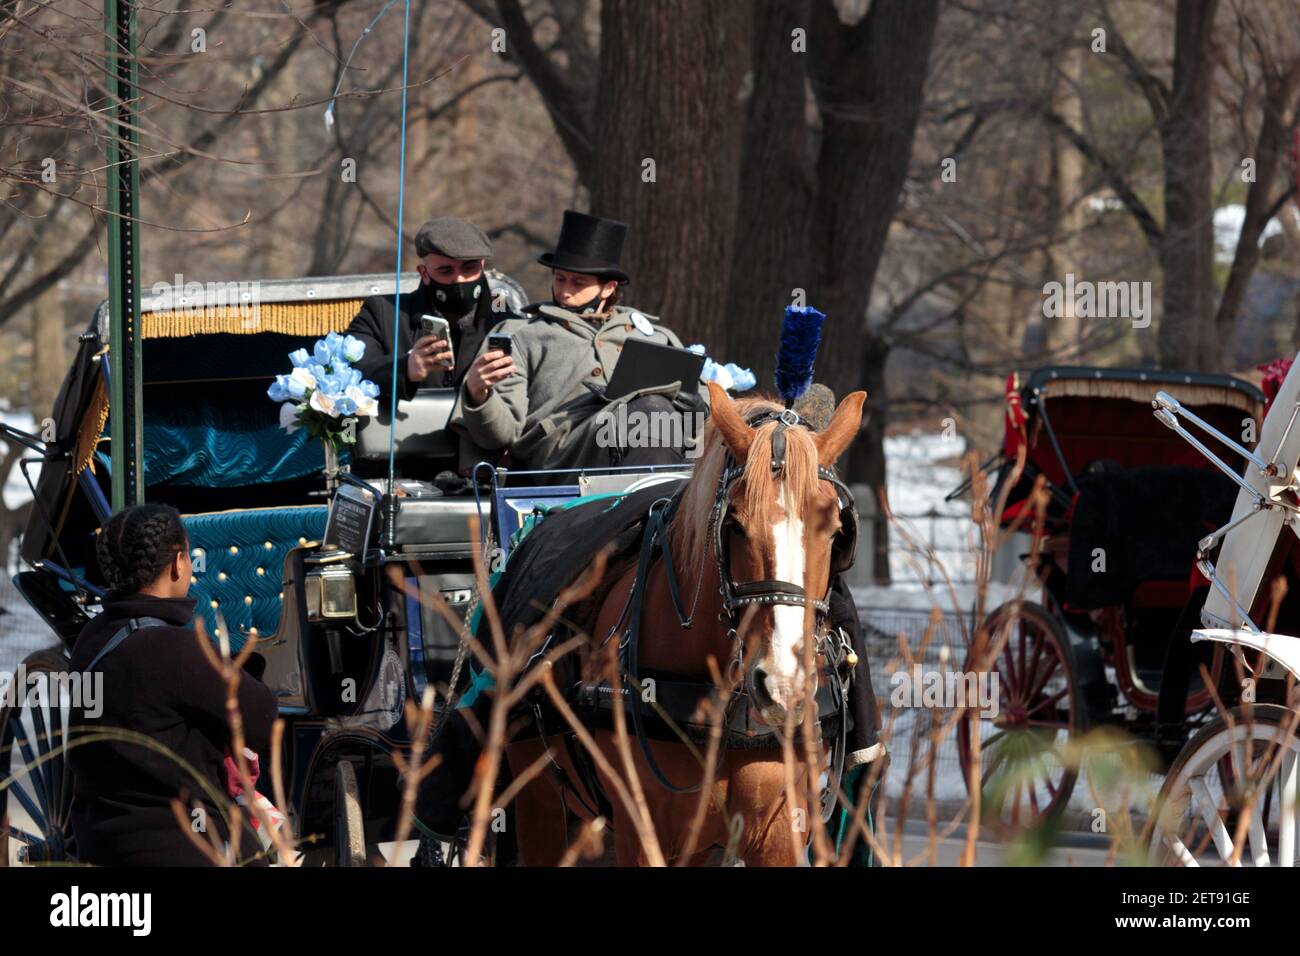 two horse carriage drivers wearing face masks sit in a carriage waiting for customers in Central Park, New York in the Winter with the horse Stock Photo